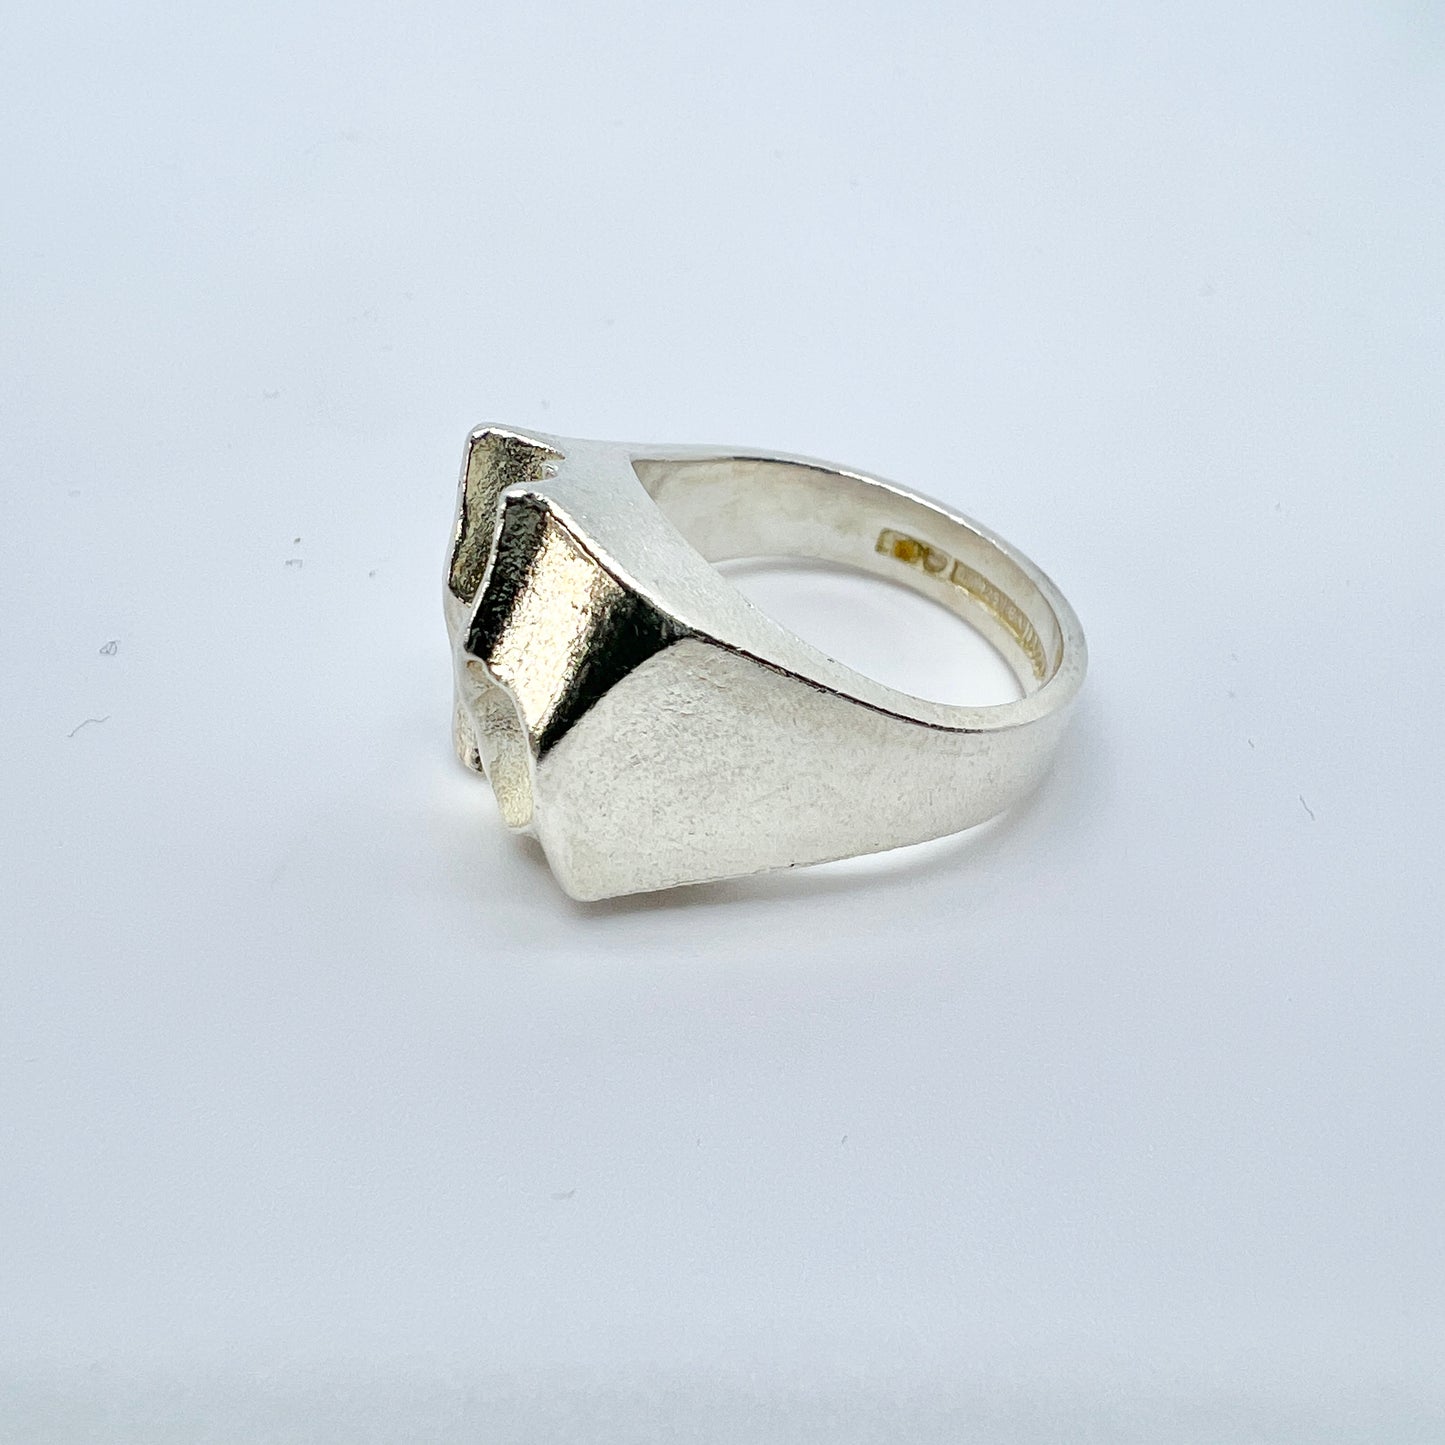 Bjorn Weckstrom for Lapponia, Finland 1979. Vintage Sterling Silver Ring.